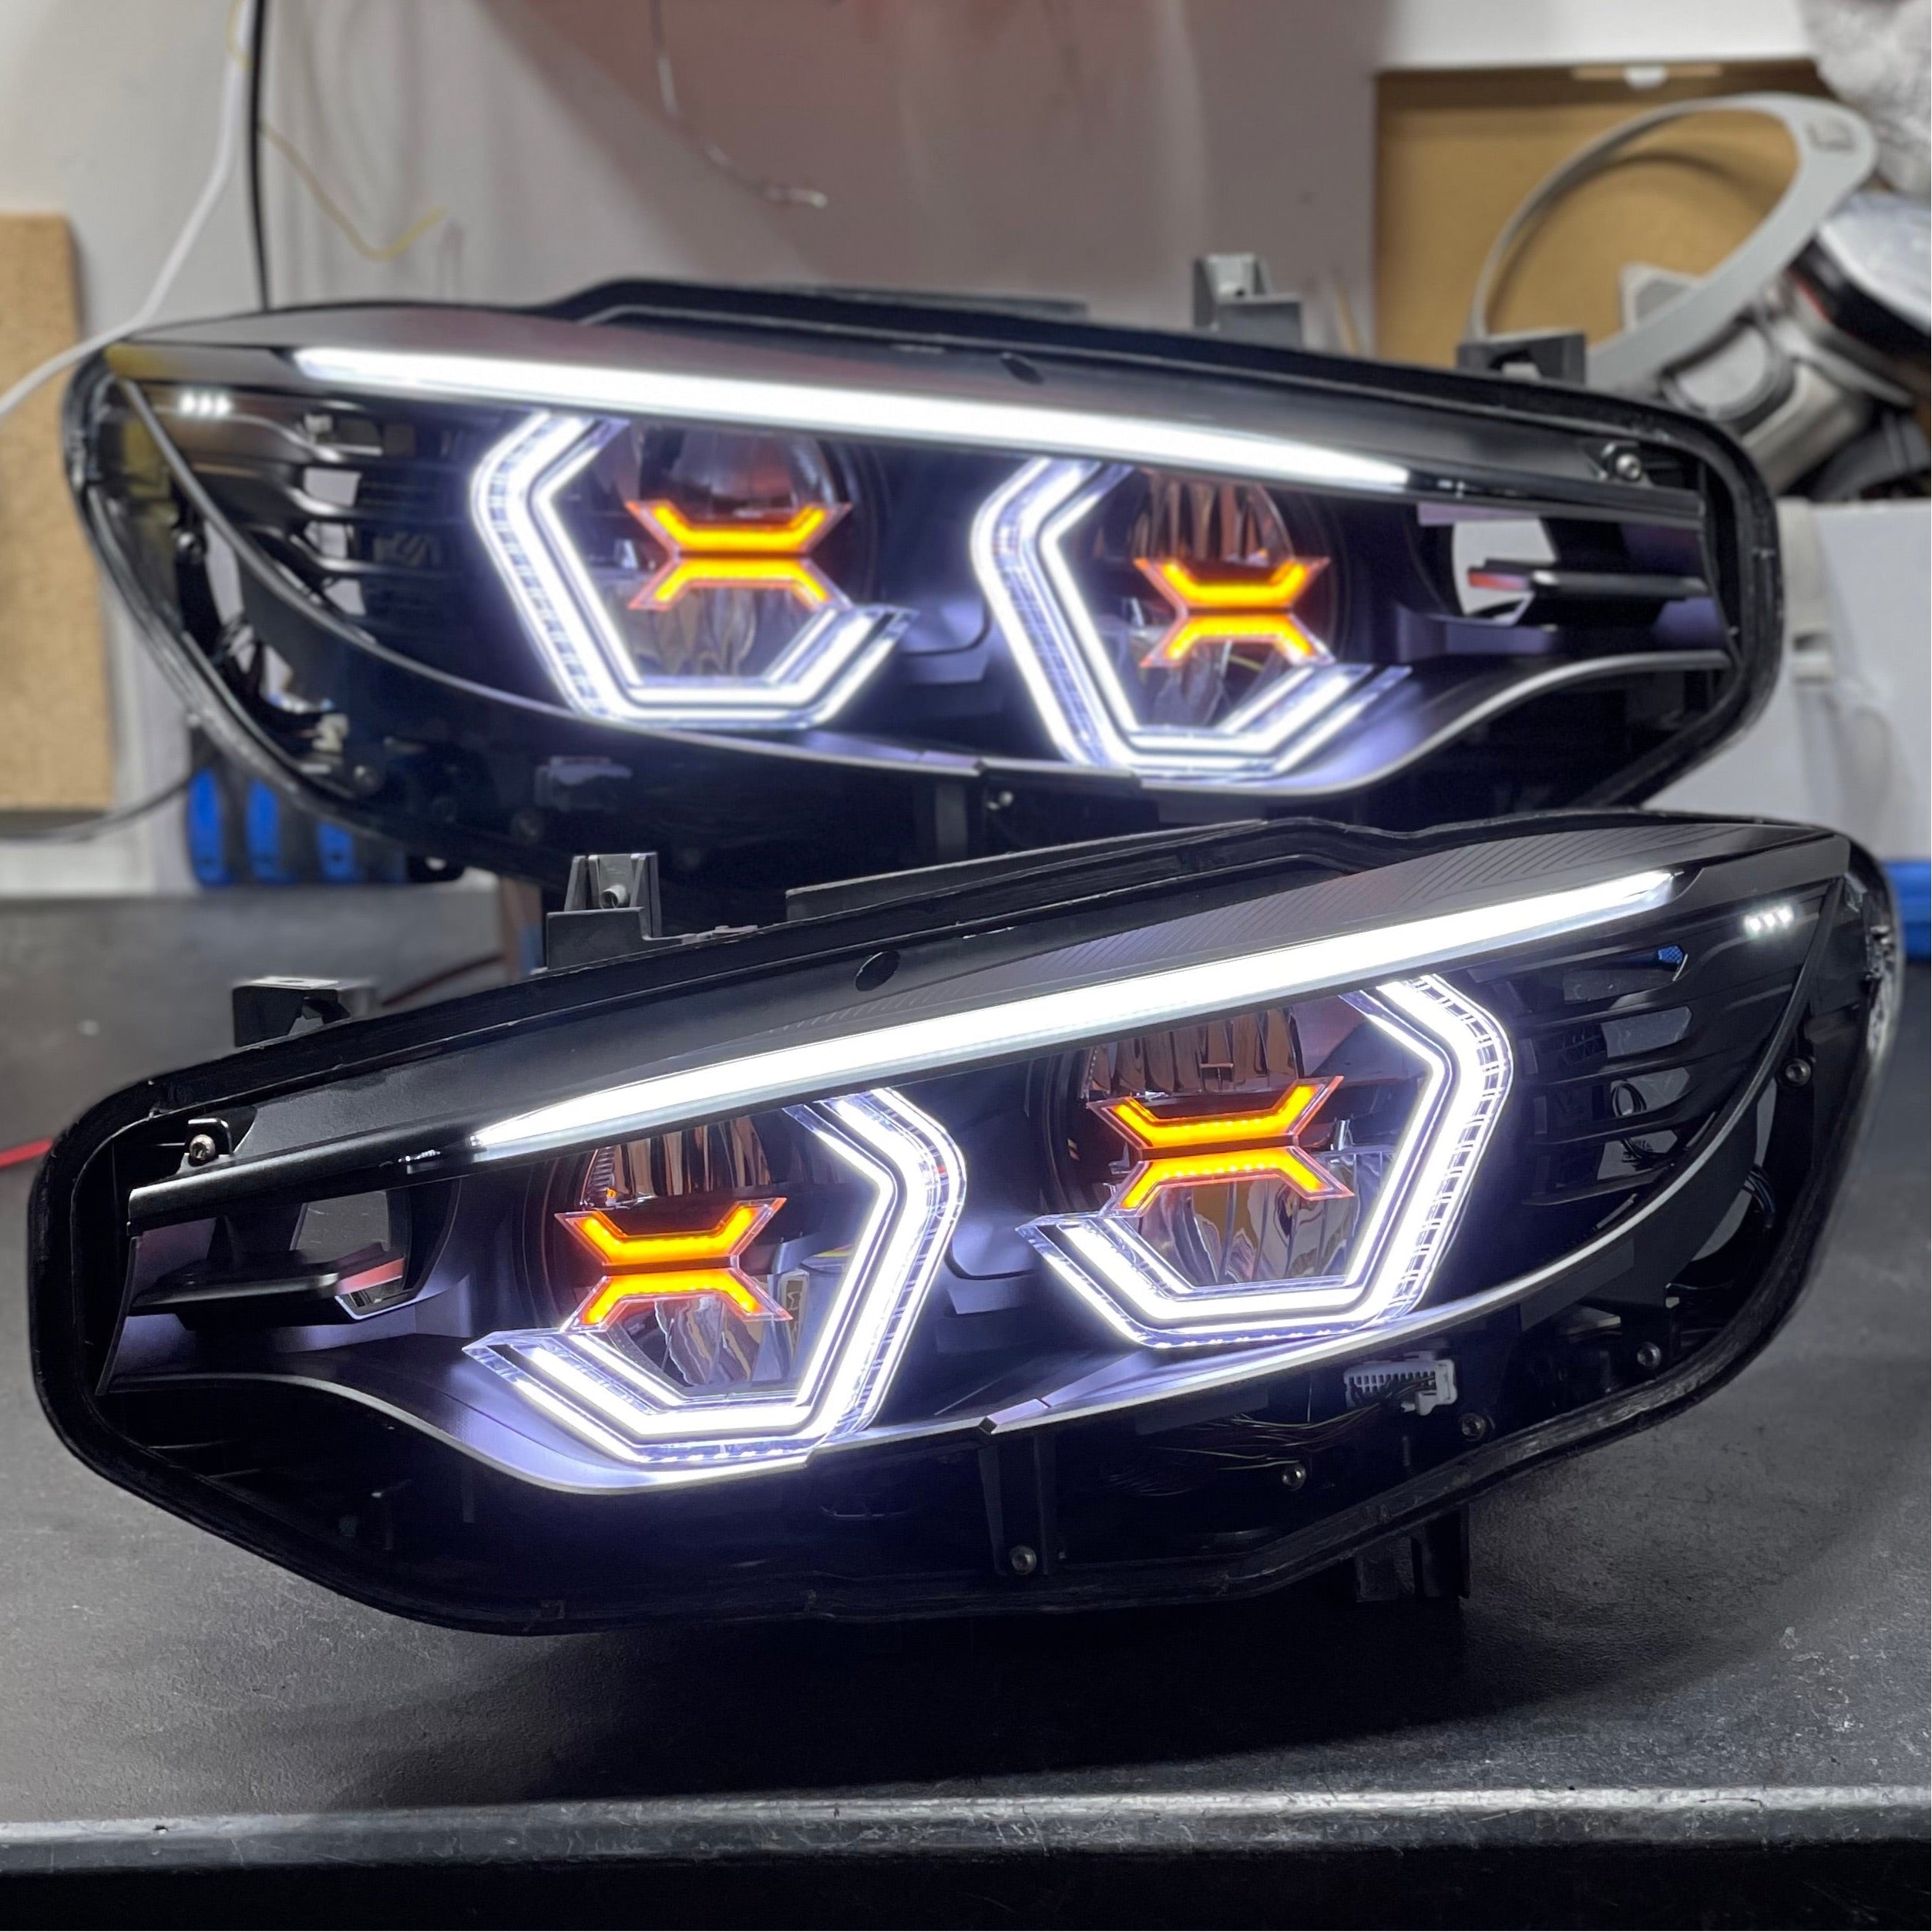 M3 M4 Vision Concept Headlights With Amber Concept X